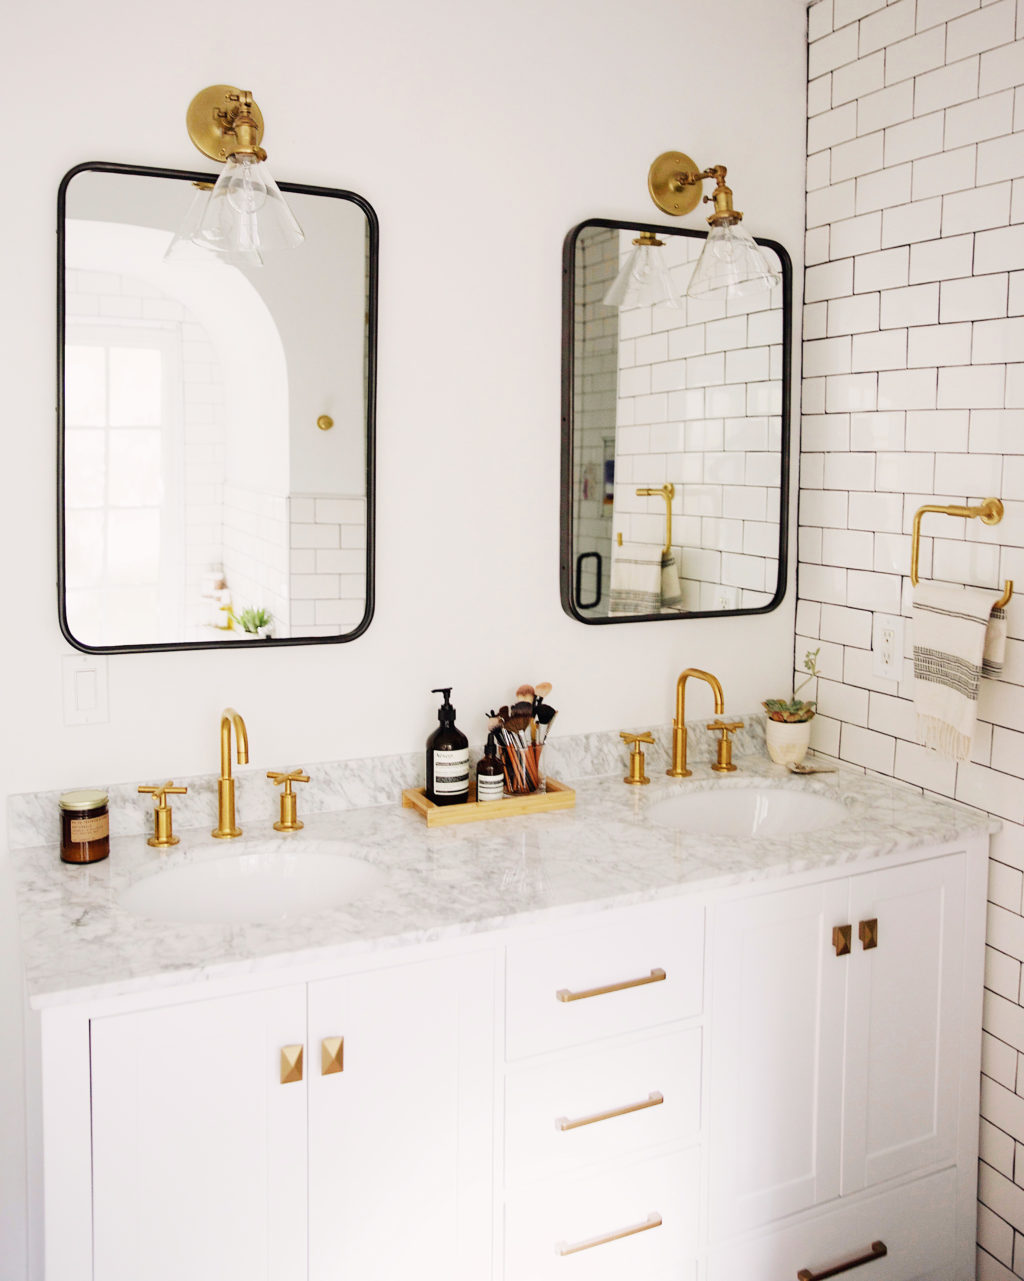 Minimal black and white subway tile bathroom with brass accents